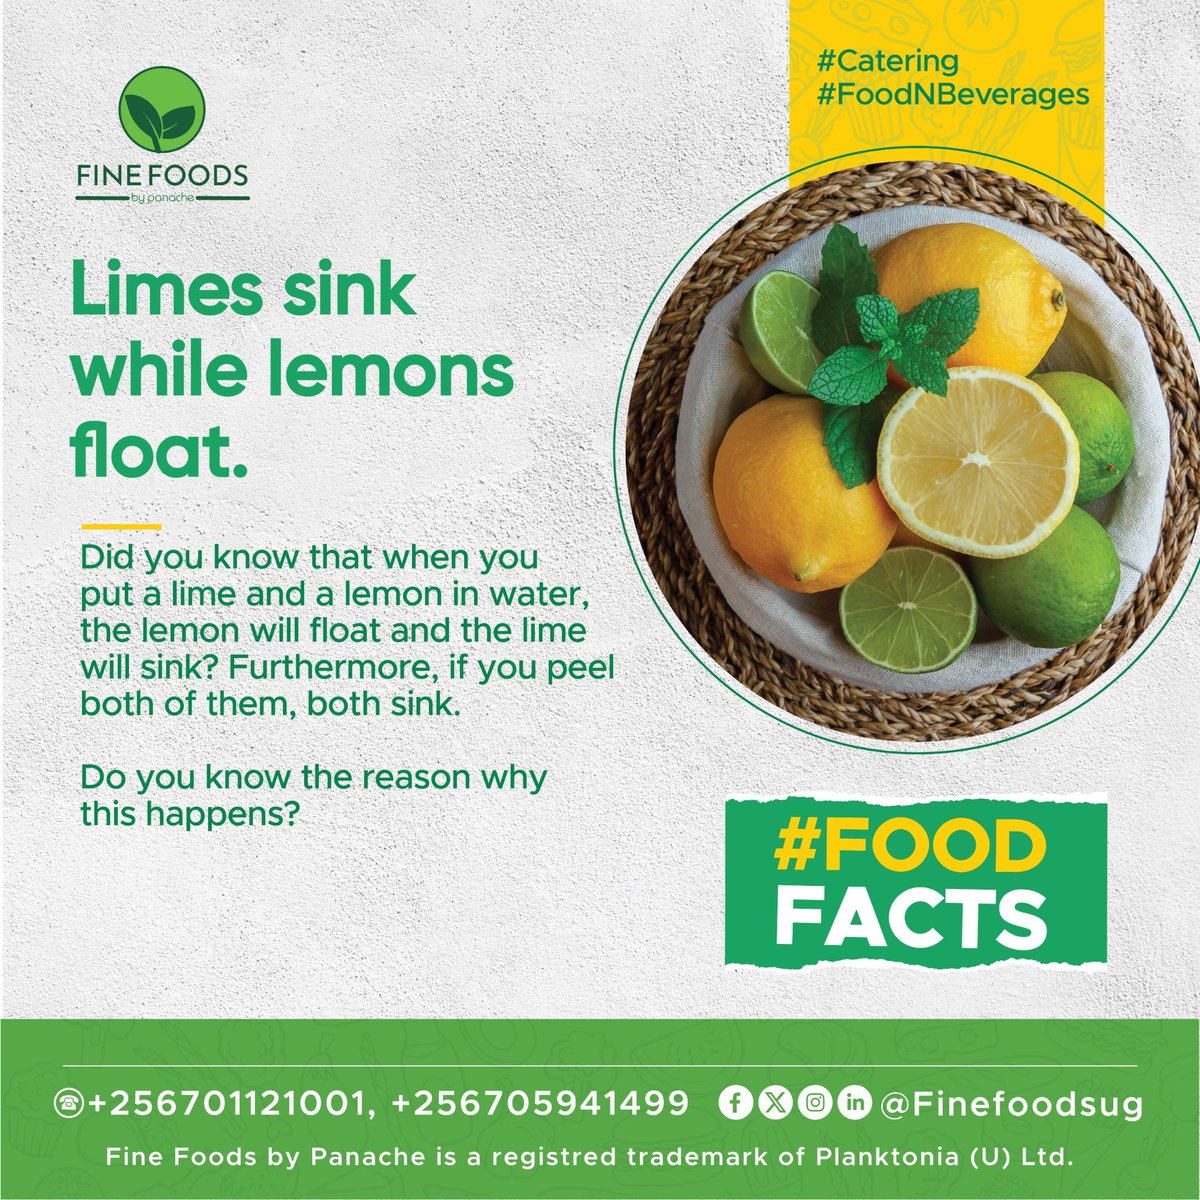 Test your science knowledge. Could you tell us the answer?

#FineFoodsUg
#FoodTips
#FoodPhotography
#Food
#Events.